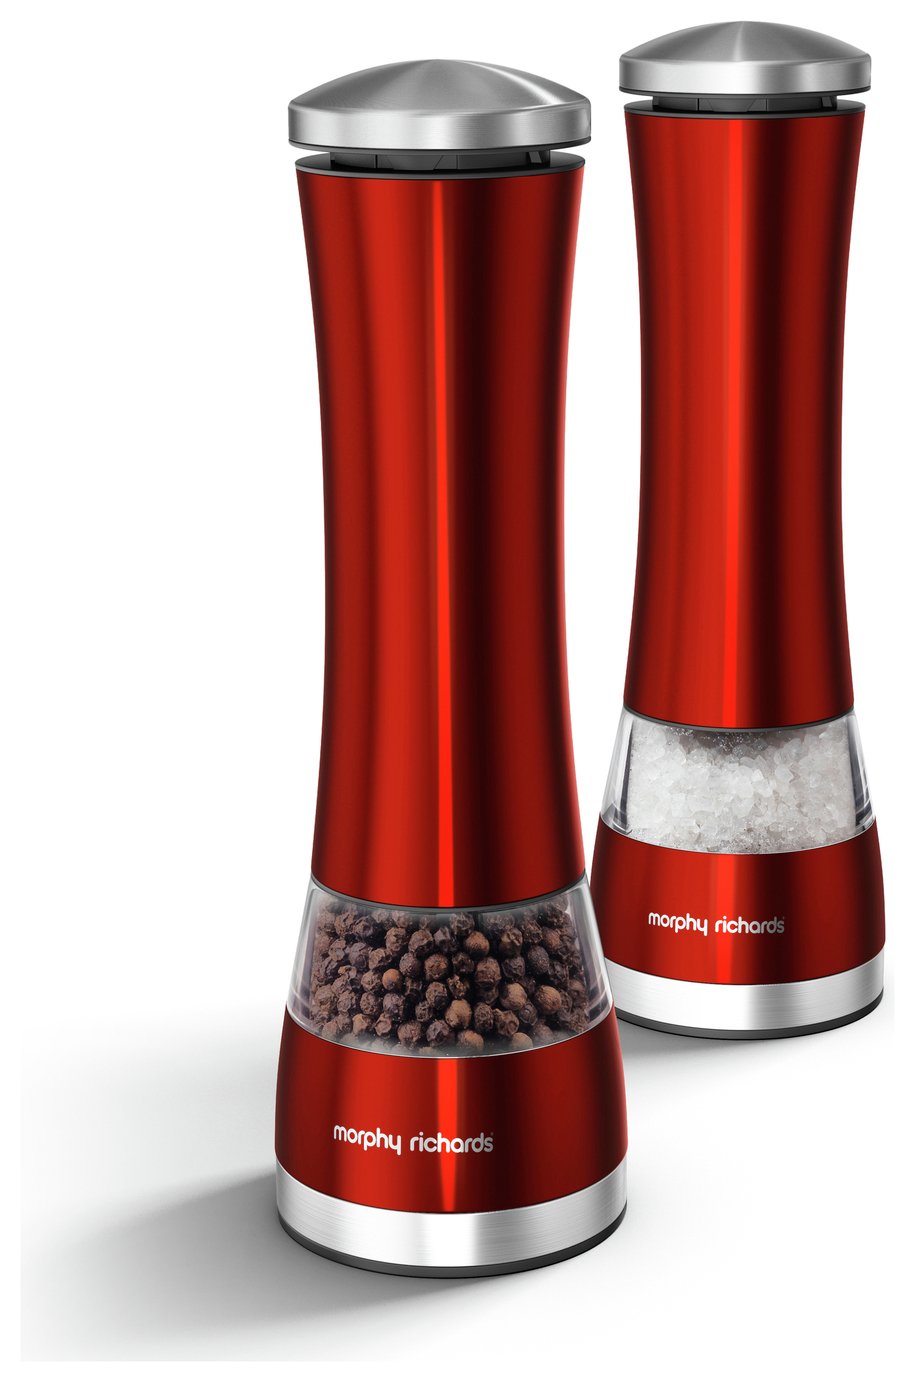 Morphy Richards Accents Salt and Pepper Mills Review